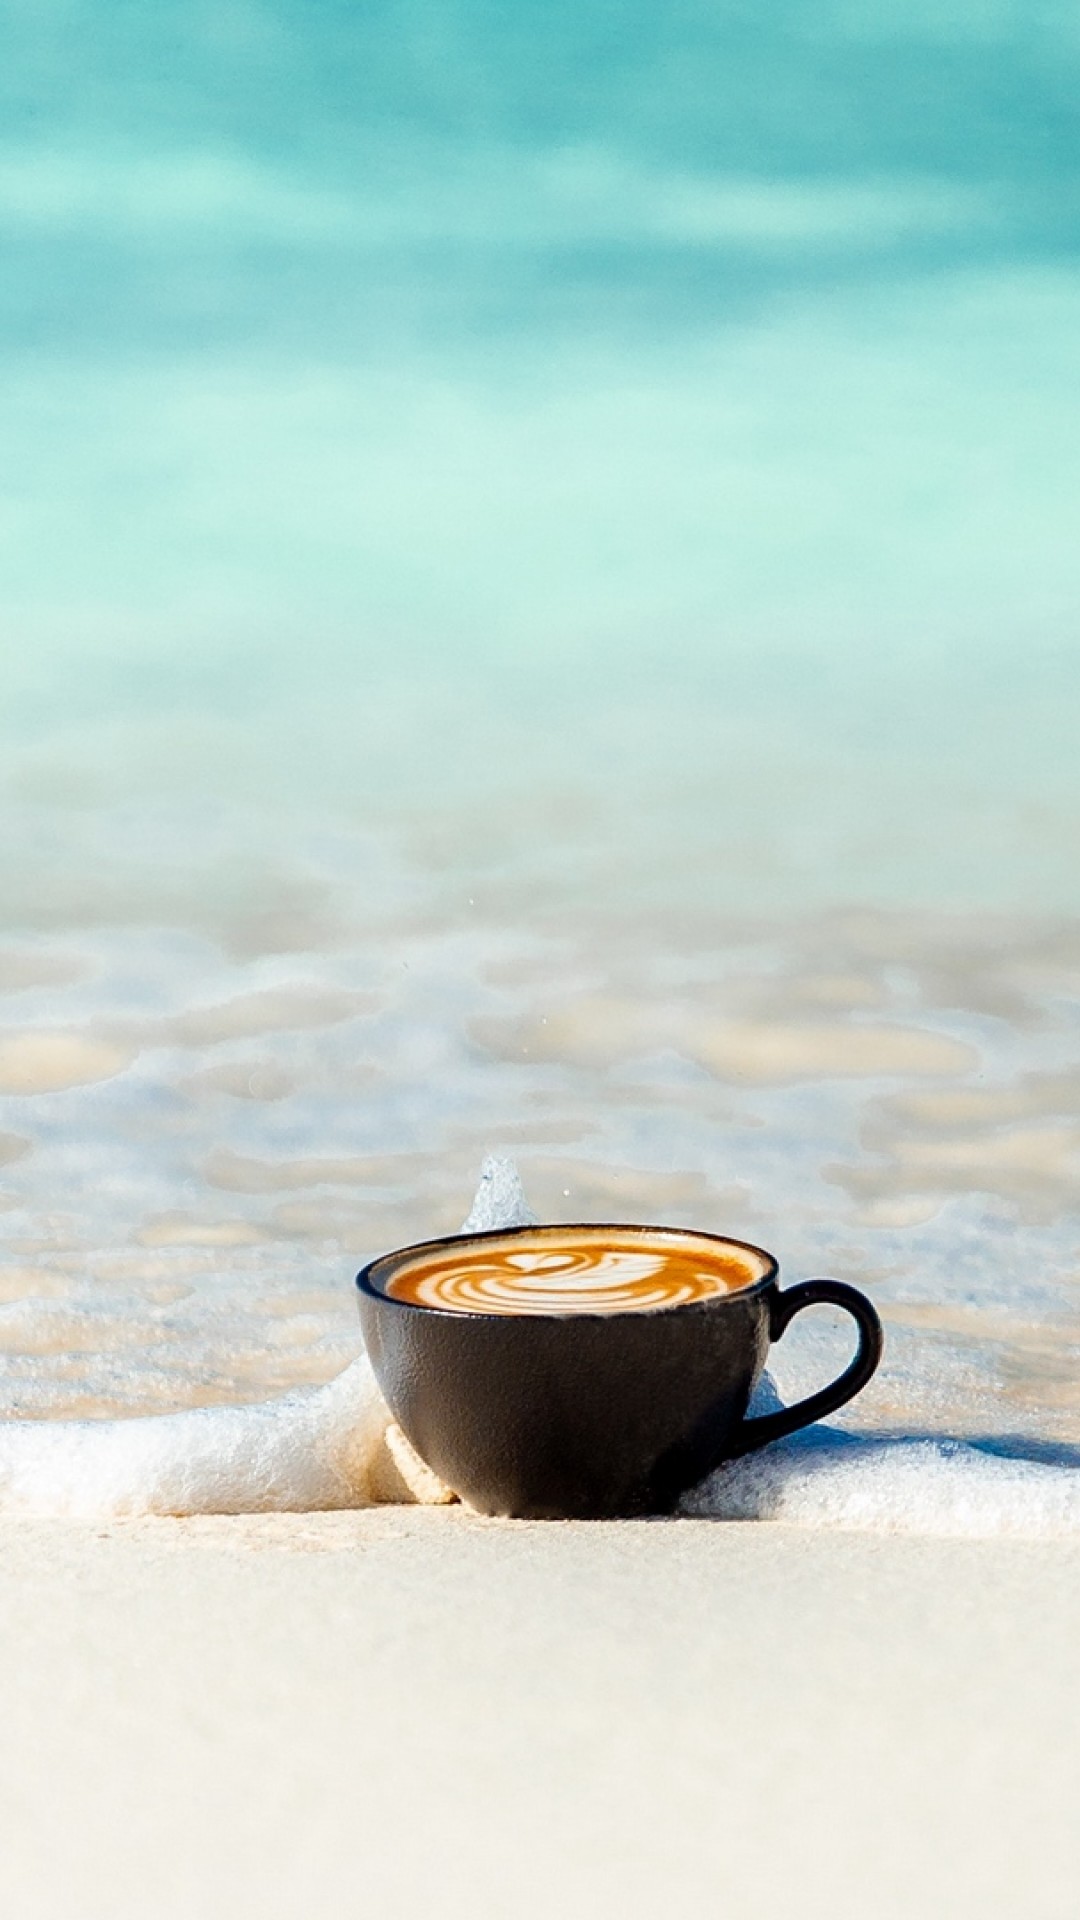 Cup of coffee at the coast HD Wallpaper iPhone 6 / 6S Plus - HD Wallpaper -  